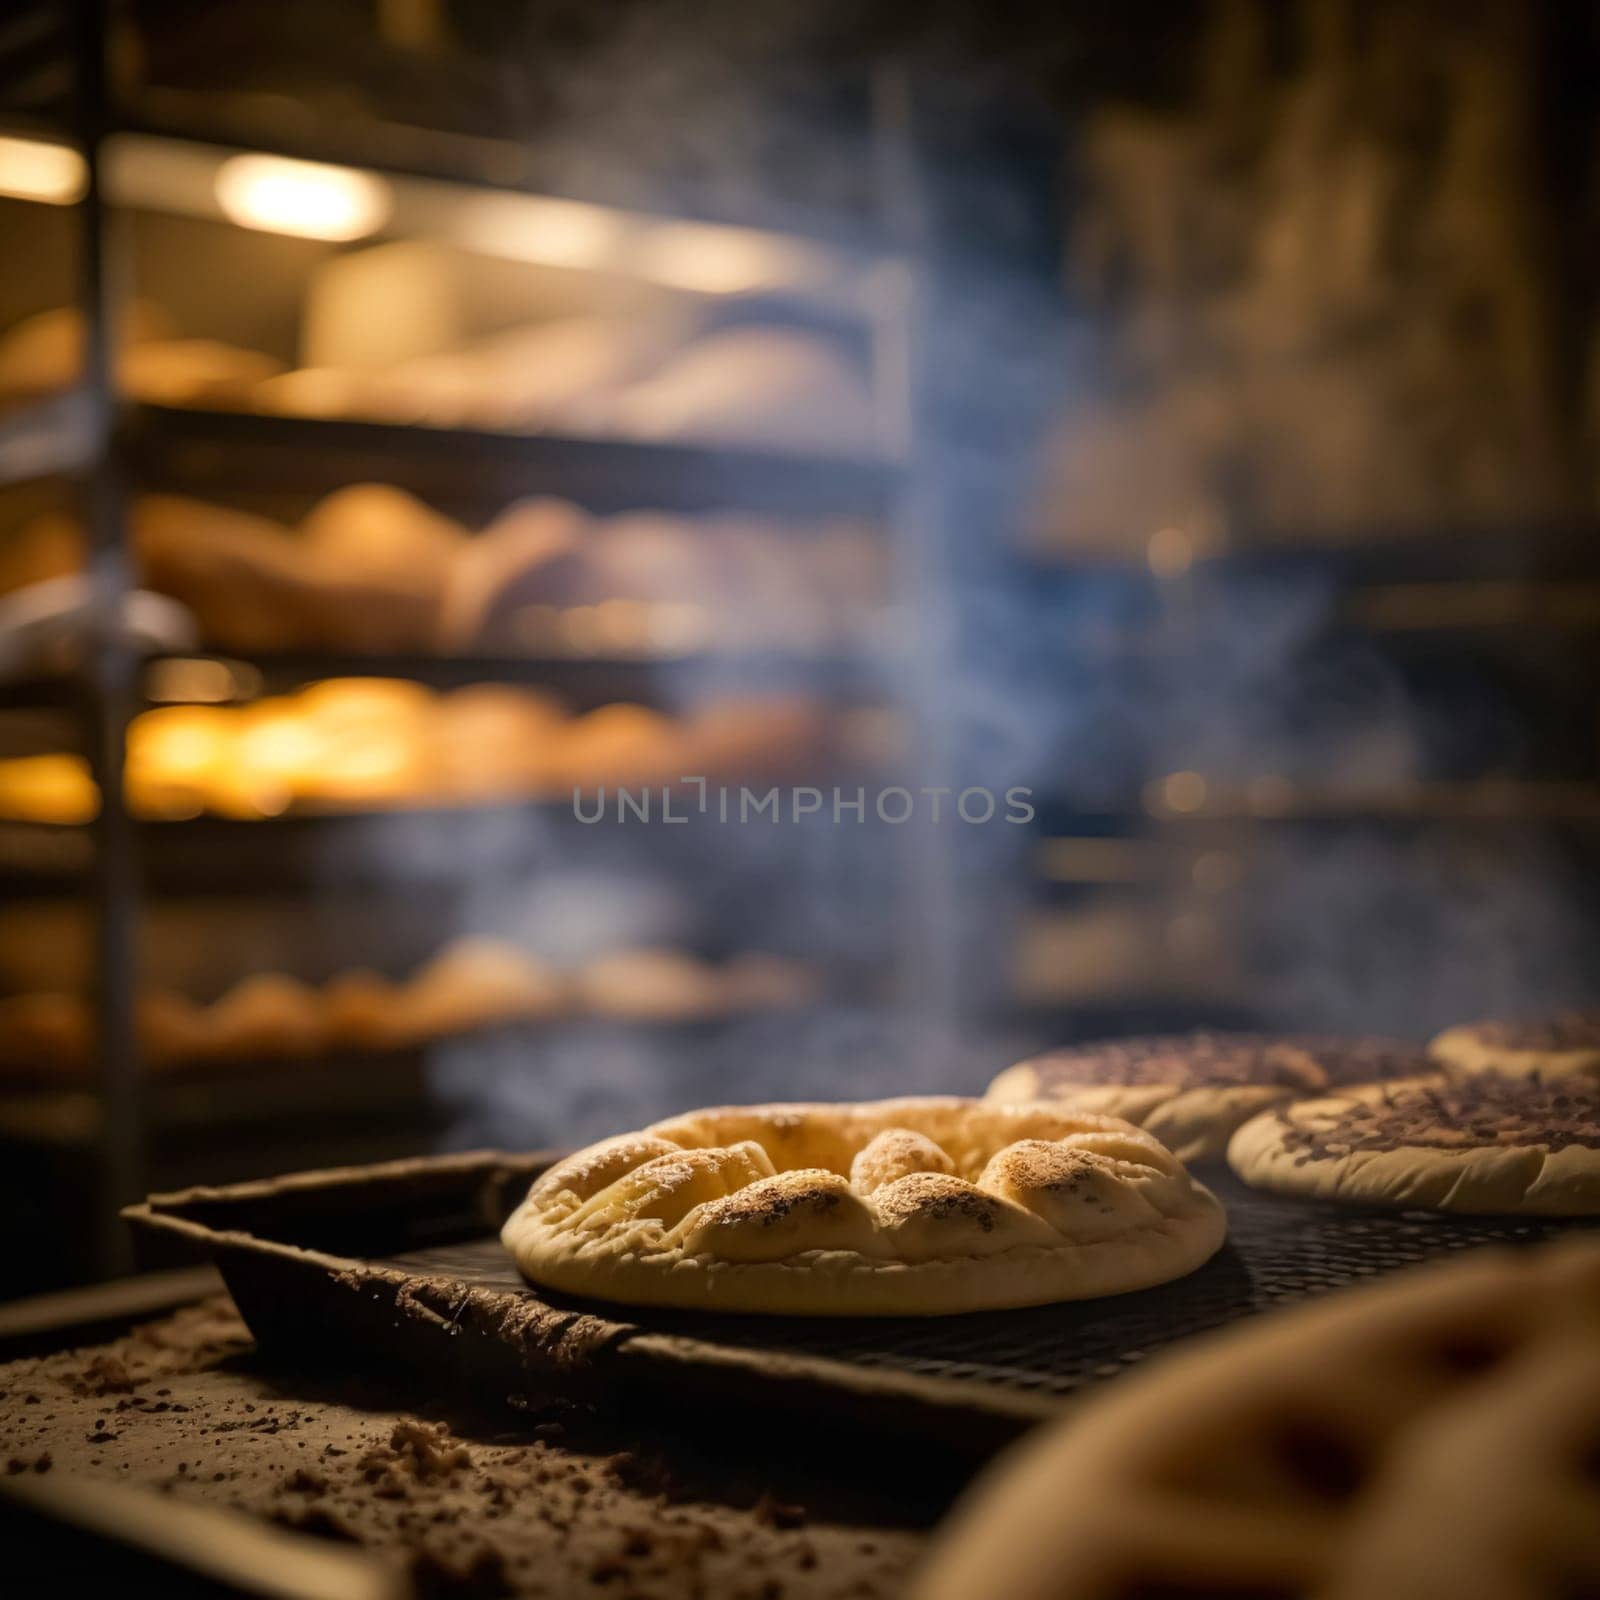 Bakery with hot fresh bread and pastry baking in the old town bakery, freshly baked products on shelves and the oven, small local business and food production idea